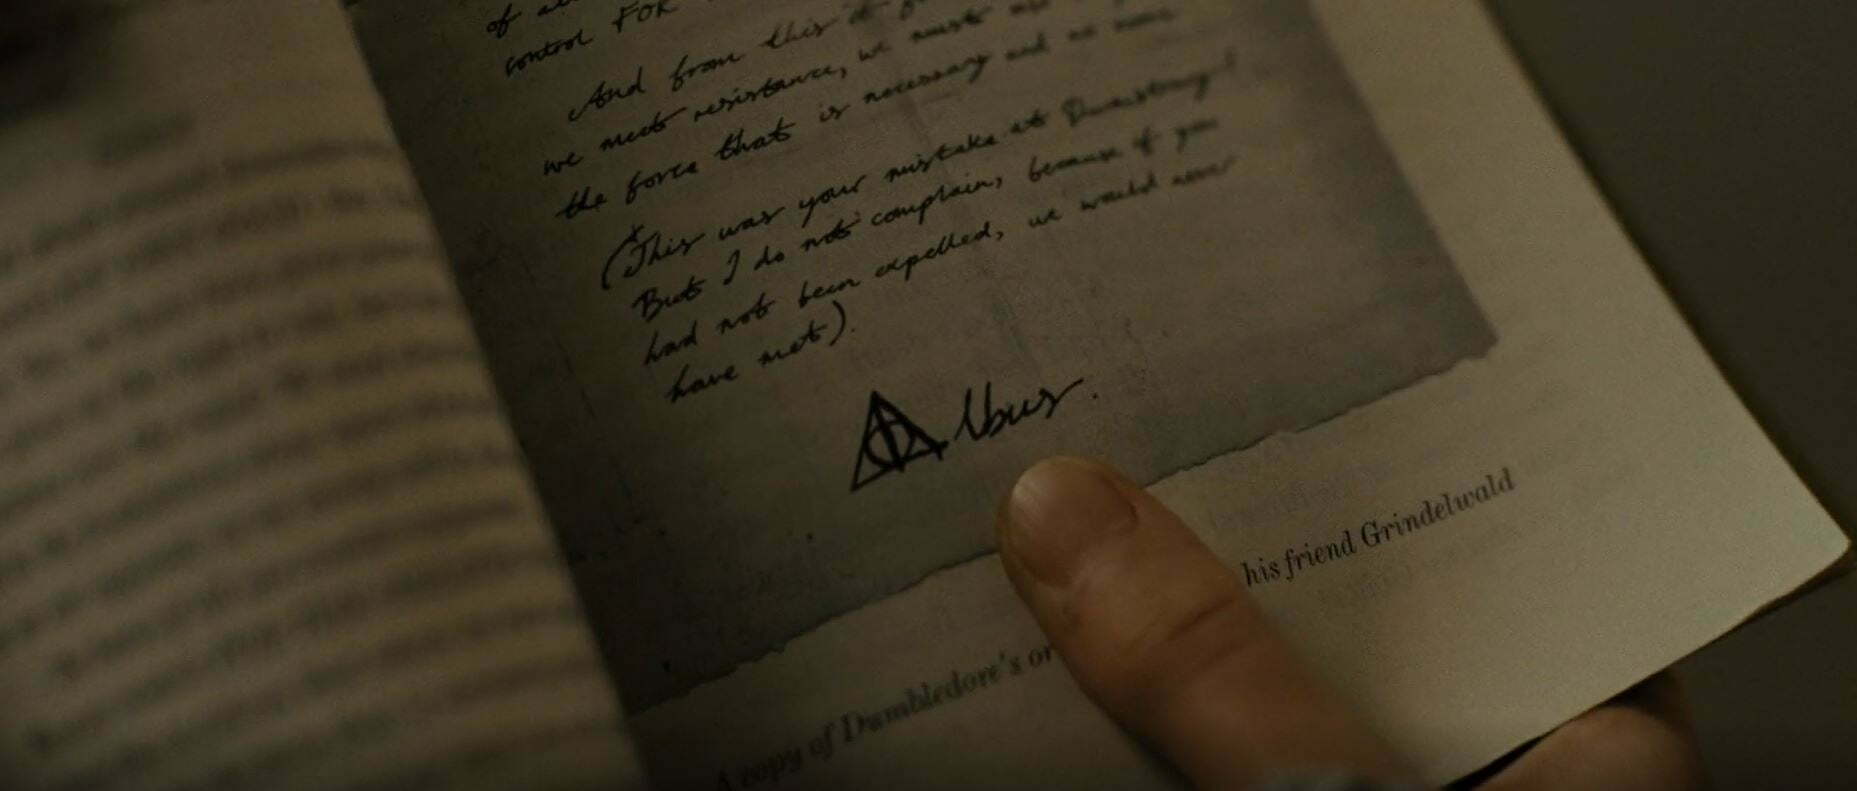 the mysterious septology symbol harry potter and the deathly hallows